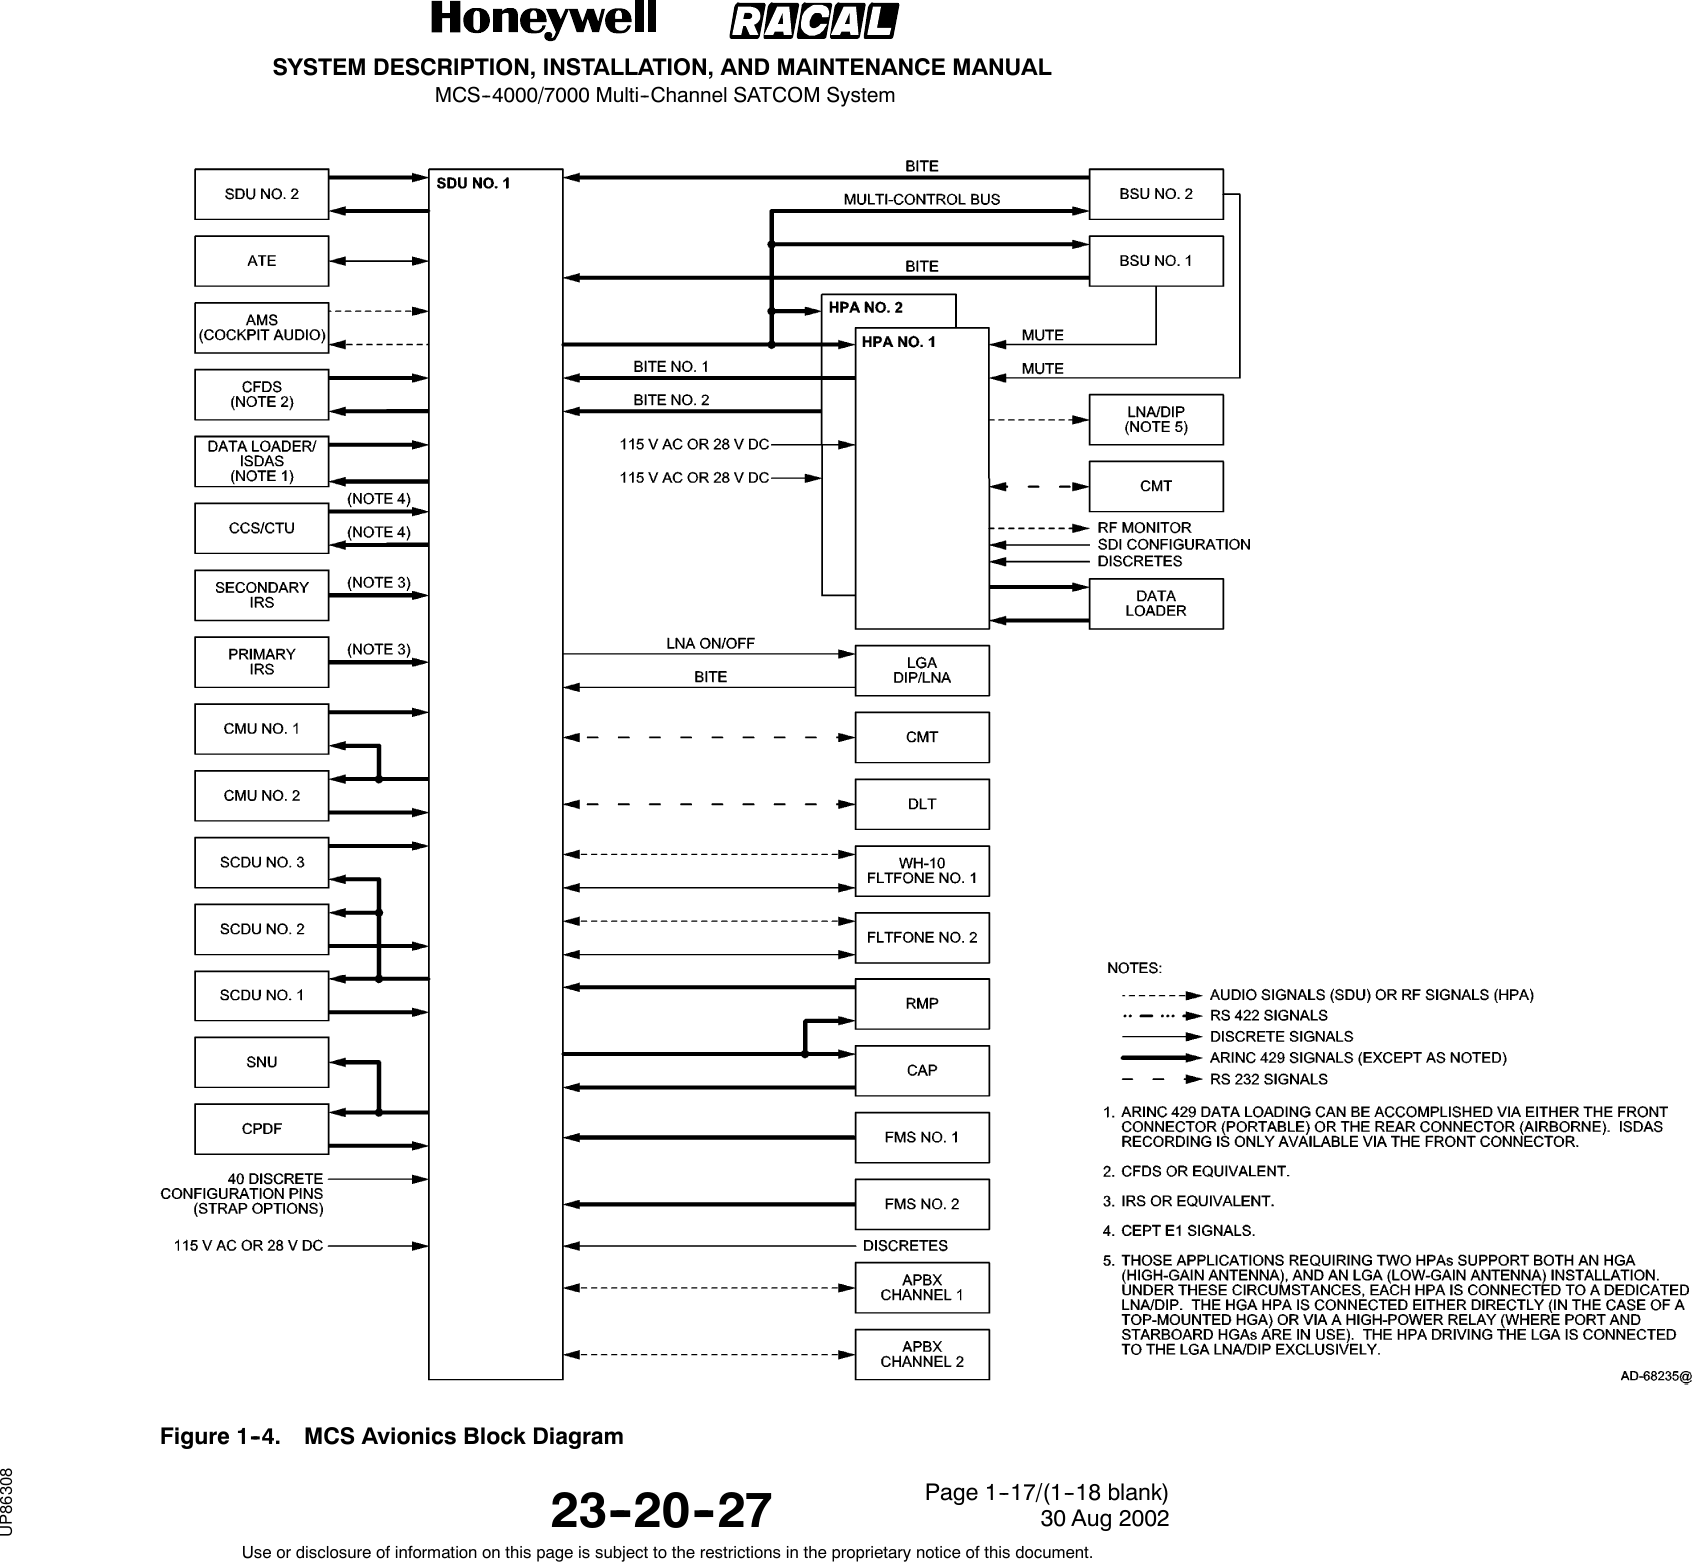 SYSTEM DESCRIPTION, INSTALLATION, AND MAINTENANCE MANUALMCS--4000/7000 Multi--Channel SATCOM System23--20--2730 Aug 2002Use or disclosure of information on this page is subject to the restrictions in the proprietary notice of this document.Page 1--17/(1--18 blank)Figure 1--4. MCS Avionics Block DiagramRELEASED FOR THE EXCLUSIVE USE BY: HONEYWELL INTERNATIONALUP86308